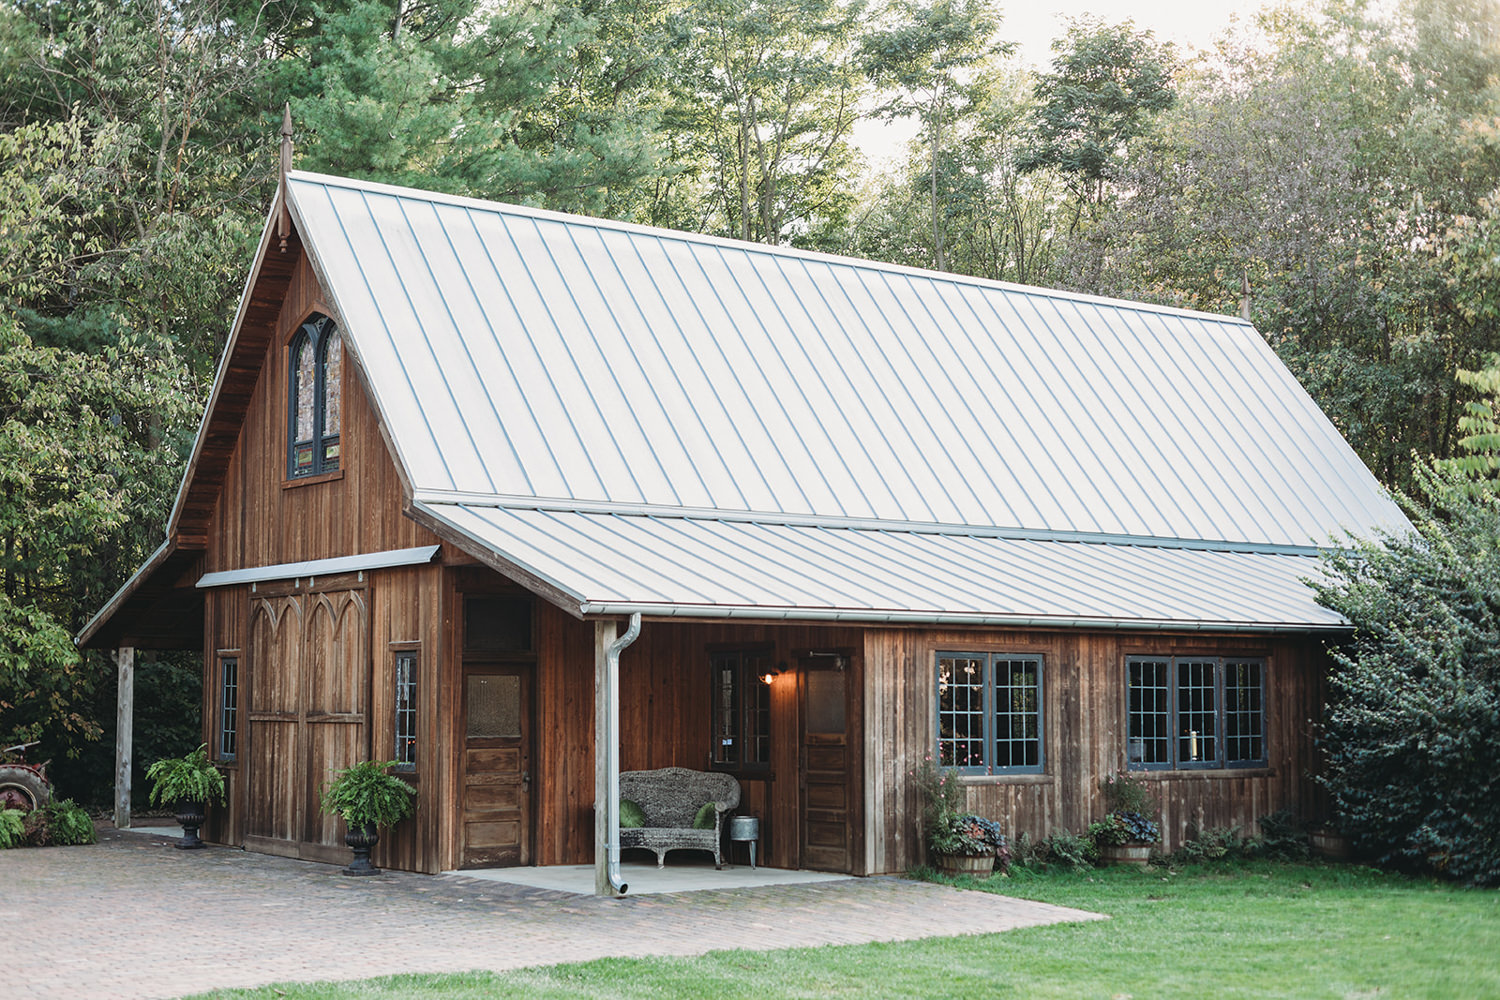 best indianapolis barn venues for weddings, the little grand barn at artisan acres estate